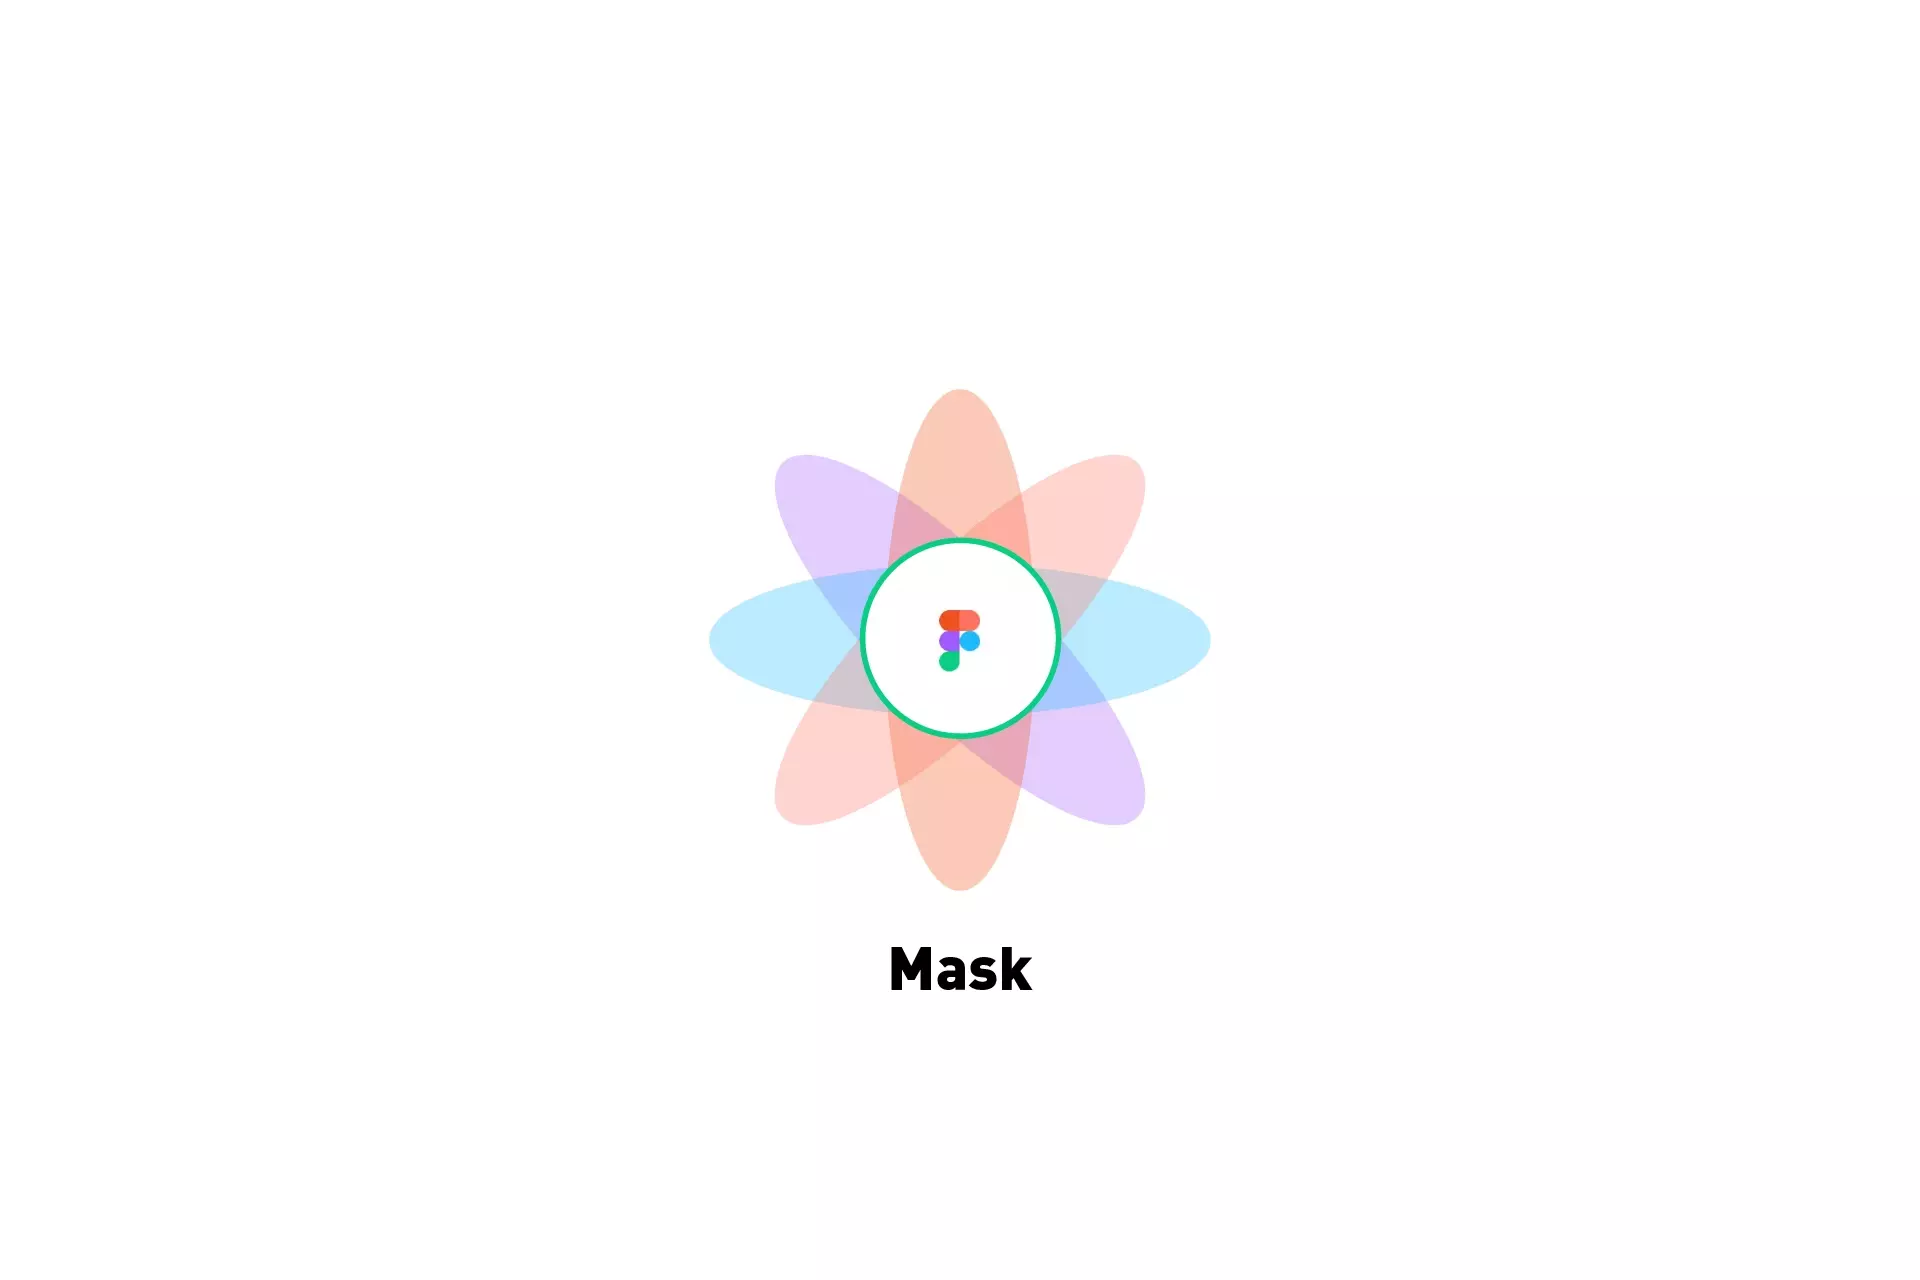 A flower that represents Figma with the text "Mask" beneath it.